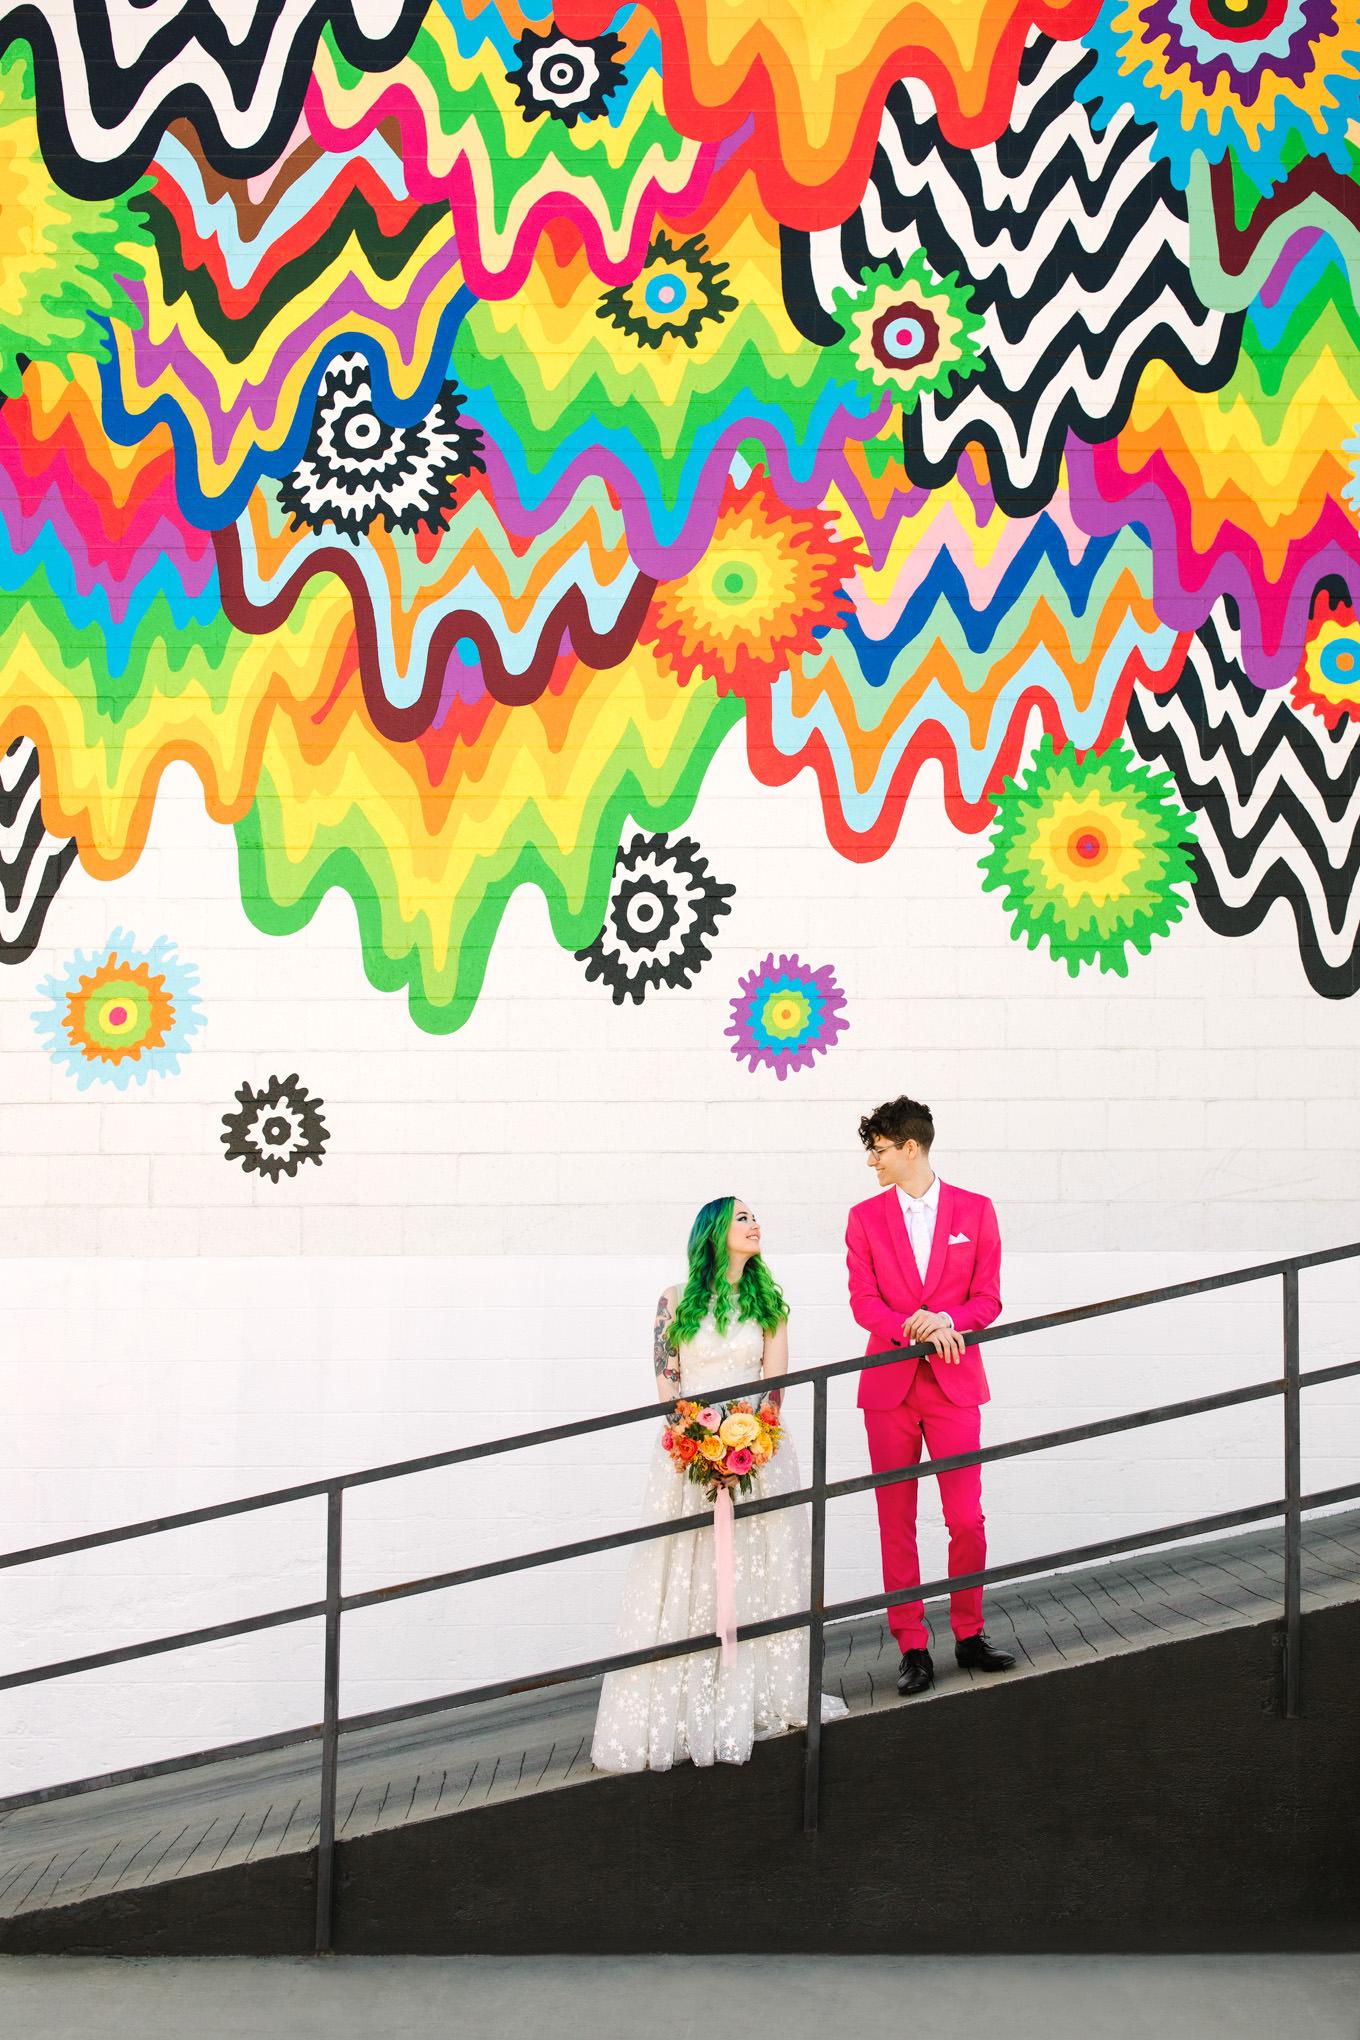 Bride with green hair and groom in pink suit in front of rainbow mural DTLA | Colorful wedding at The Unique Space Los Angeles published in The Knot Magazine | Fresh and colorful photography for fun-loving couples in Southern California | #colorfulwedding #losangeleswedding #weddingphotography #uniquespace Source: Mary Costa Photography | Los Angeles